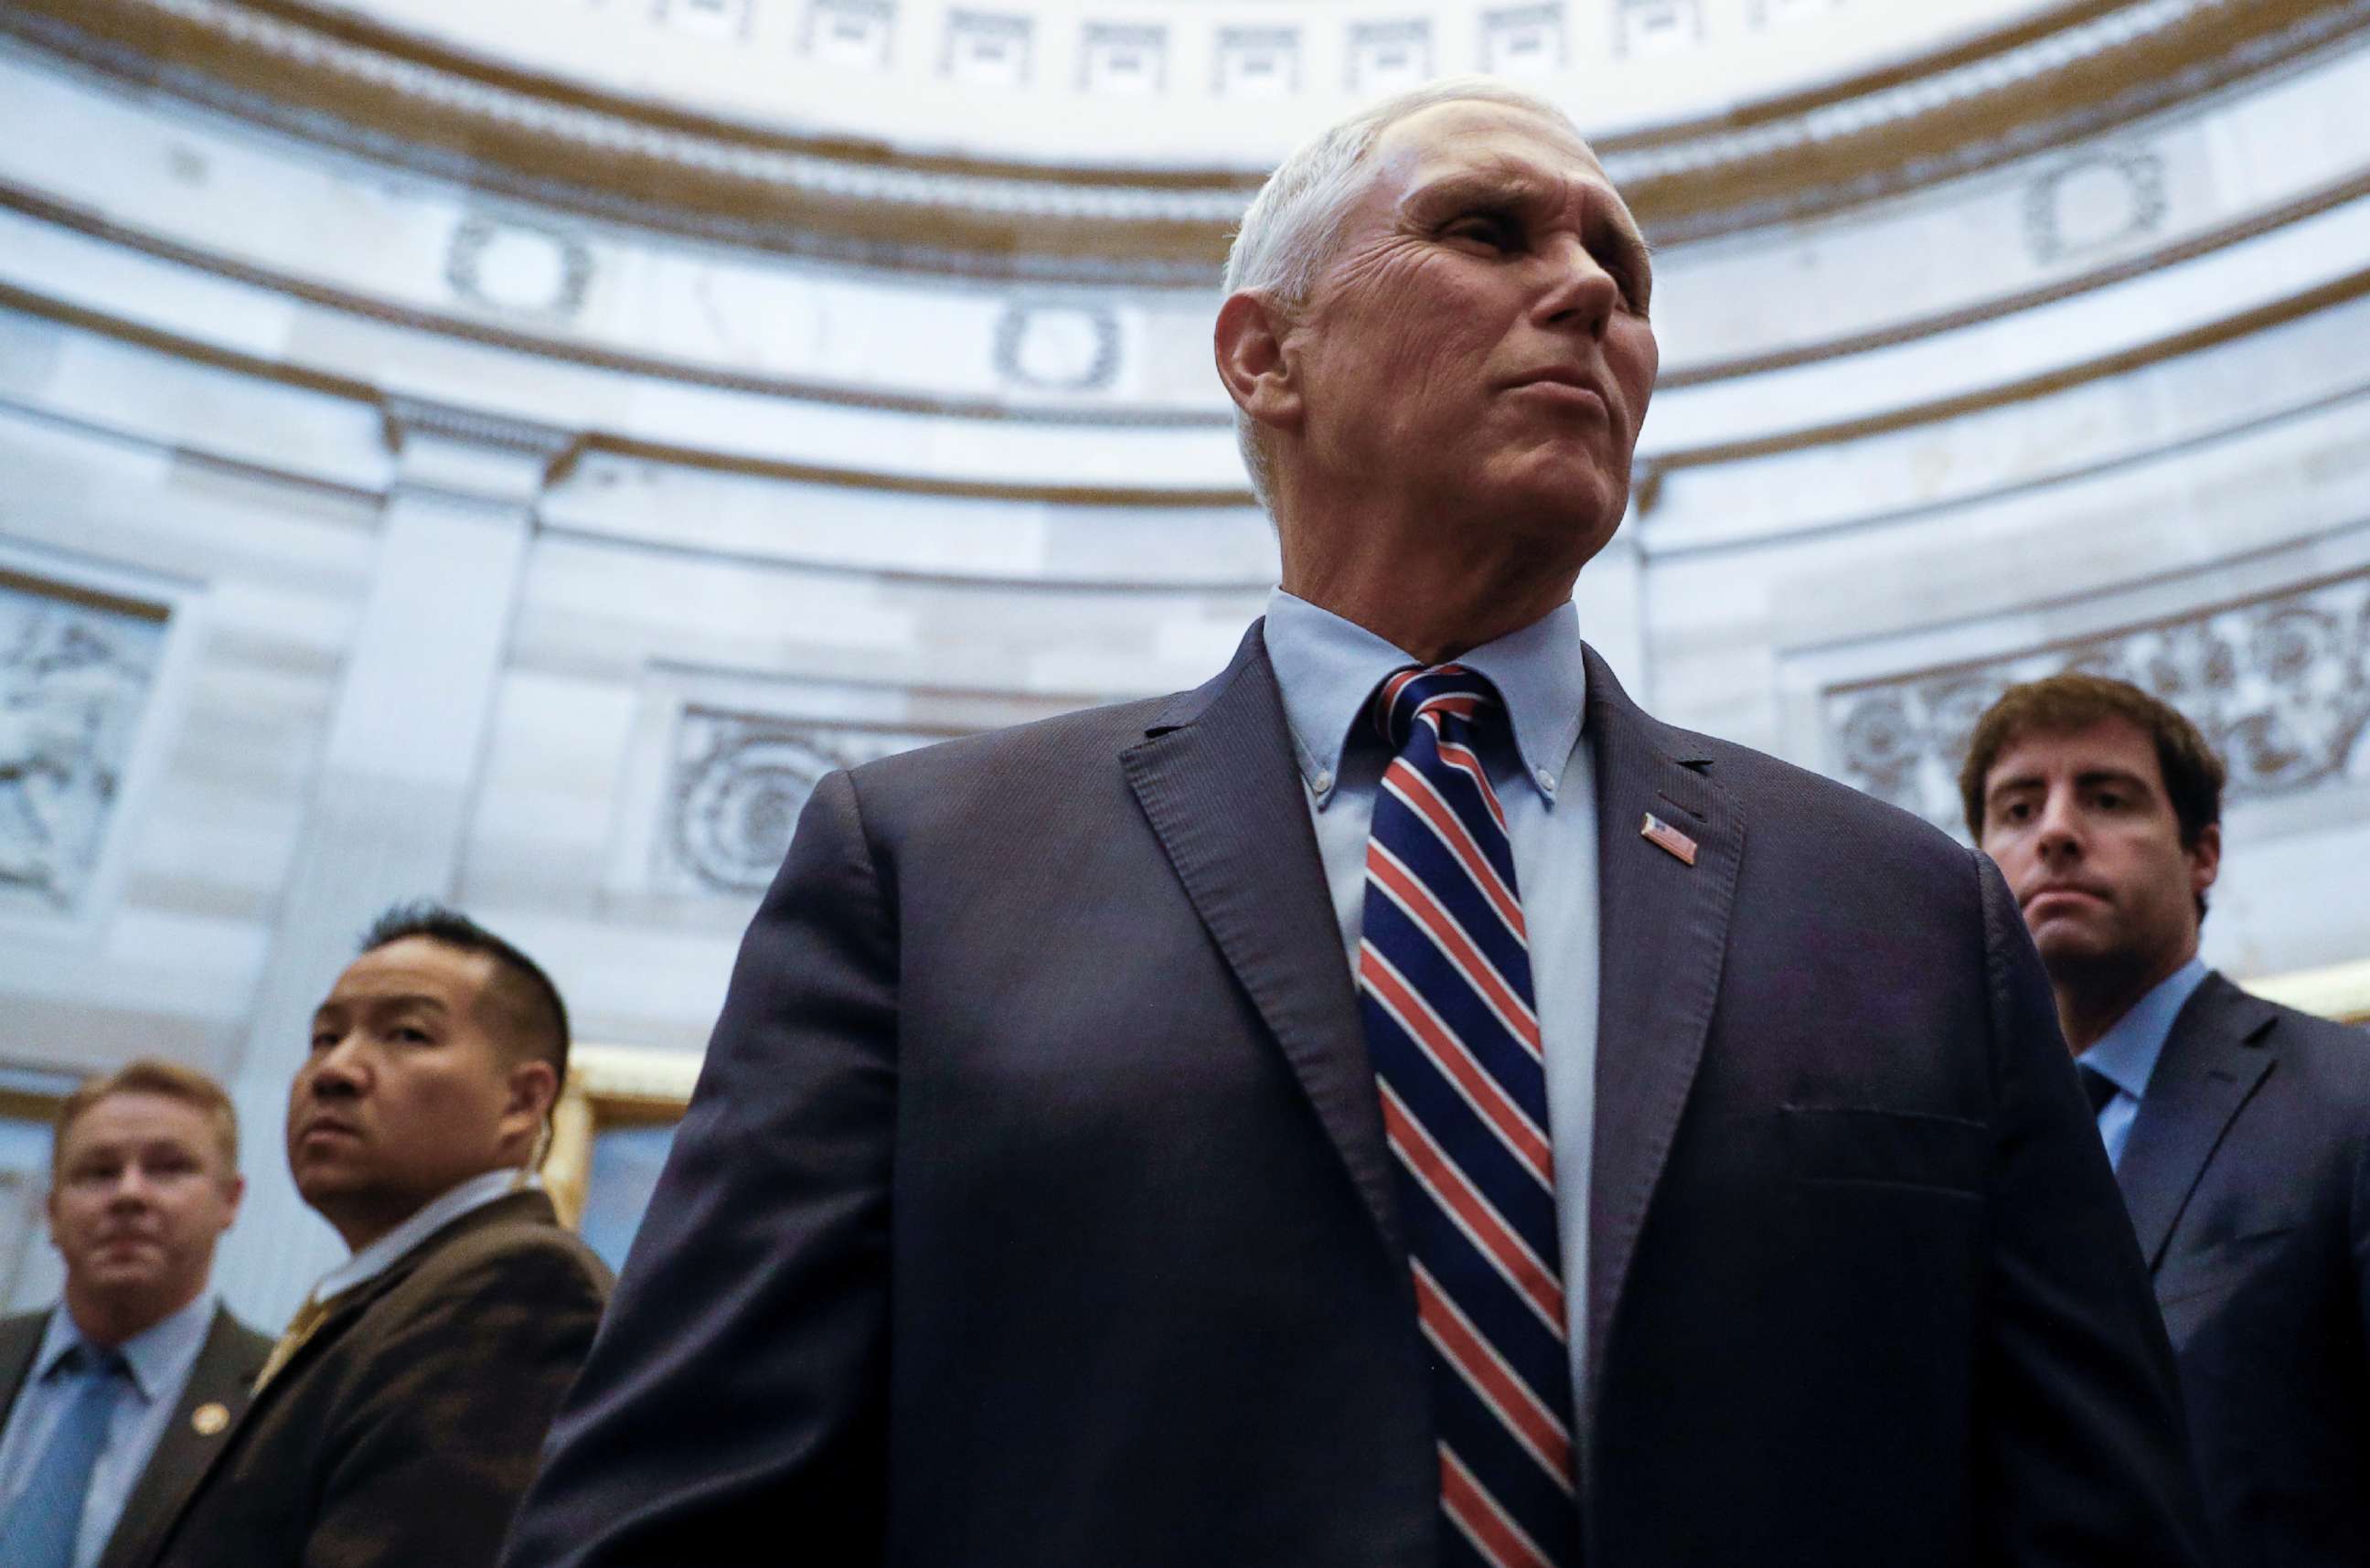 PHOTO: Vice President Mike Pence talks with Capitol visitors after he attended the weekly Republican Senate policy luncheon on Capitol Hill in Washington, Dec. 17, 2019.